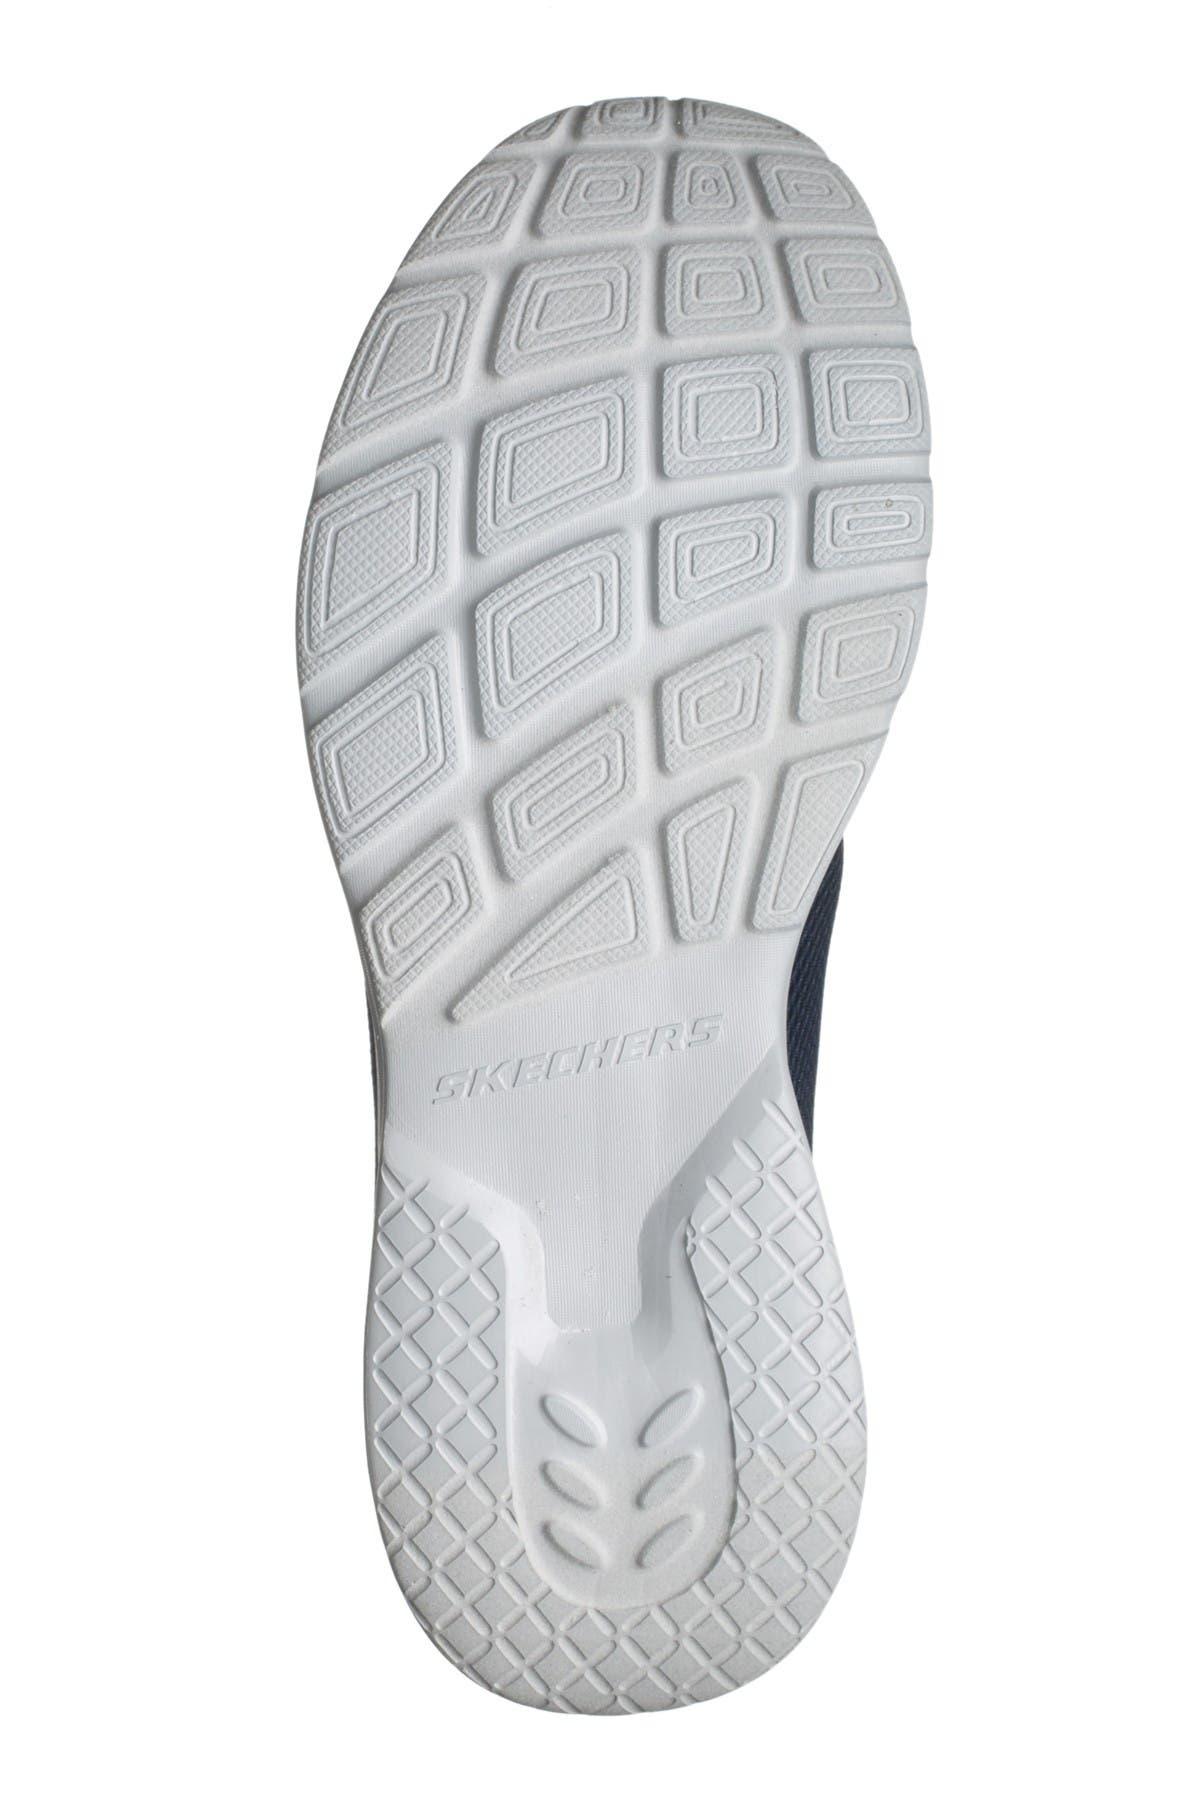 skechers dynamight review